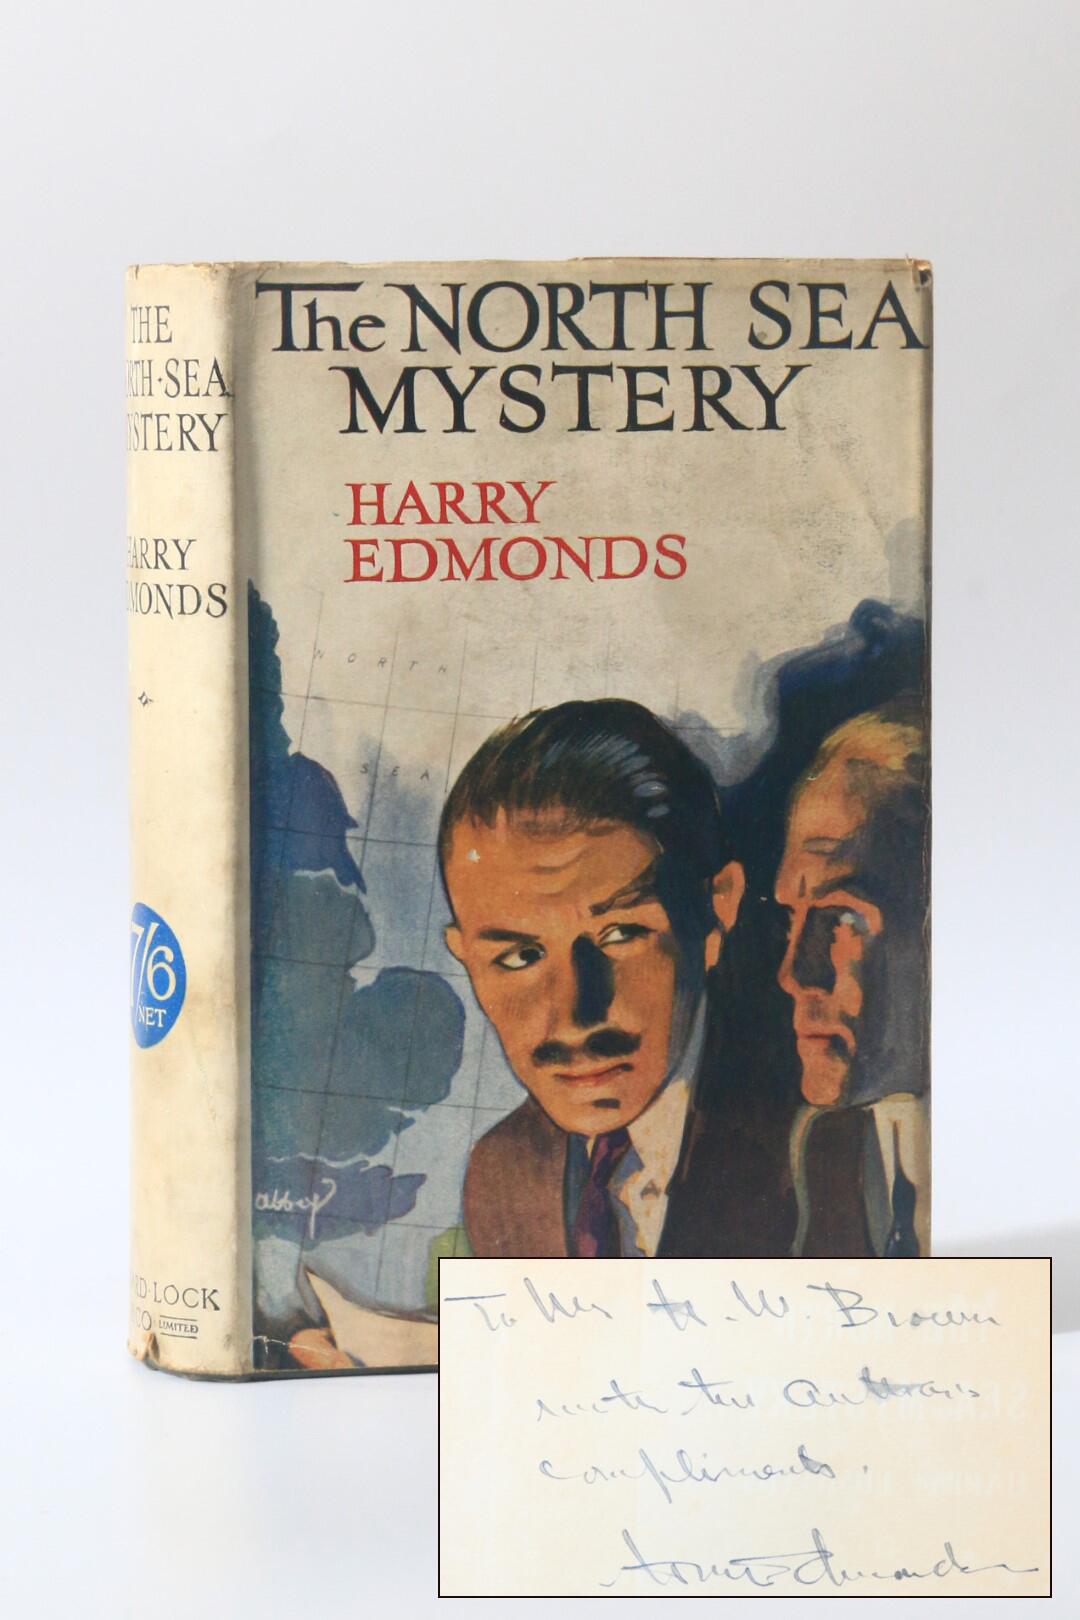 Harry Edmonds - The North Sea Mystery - Ward Lock & Co., 1930, Signed First Edition.